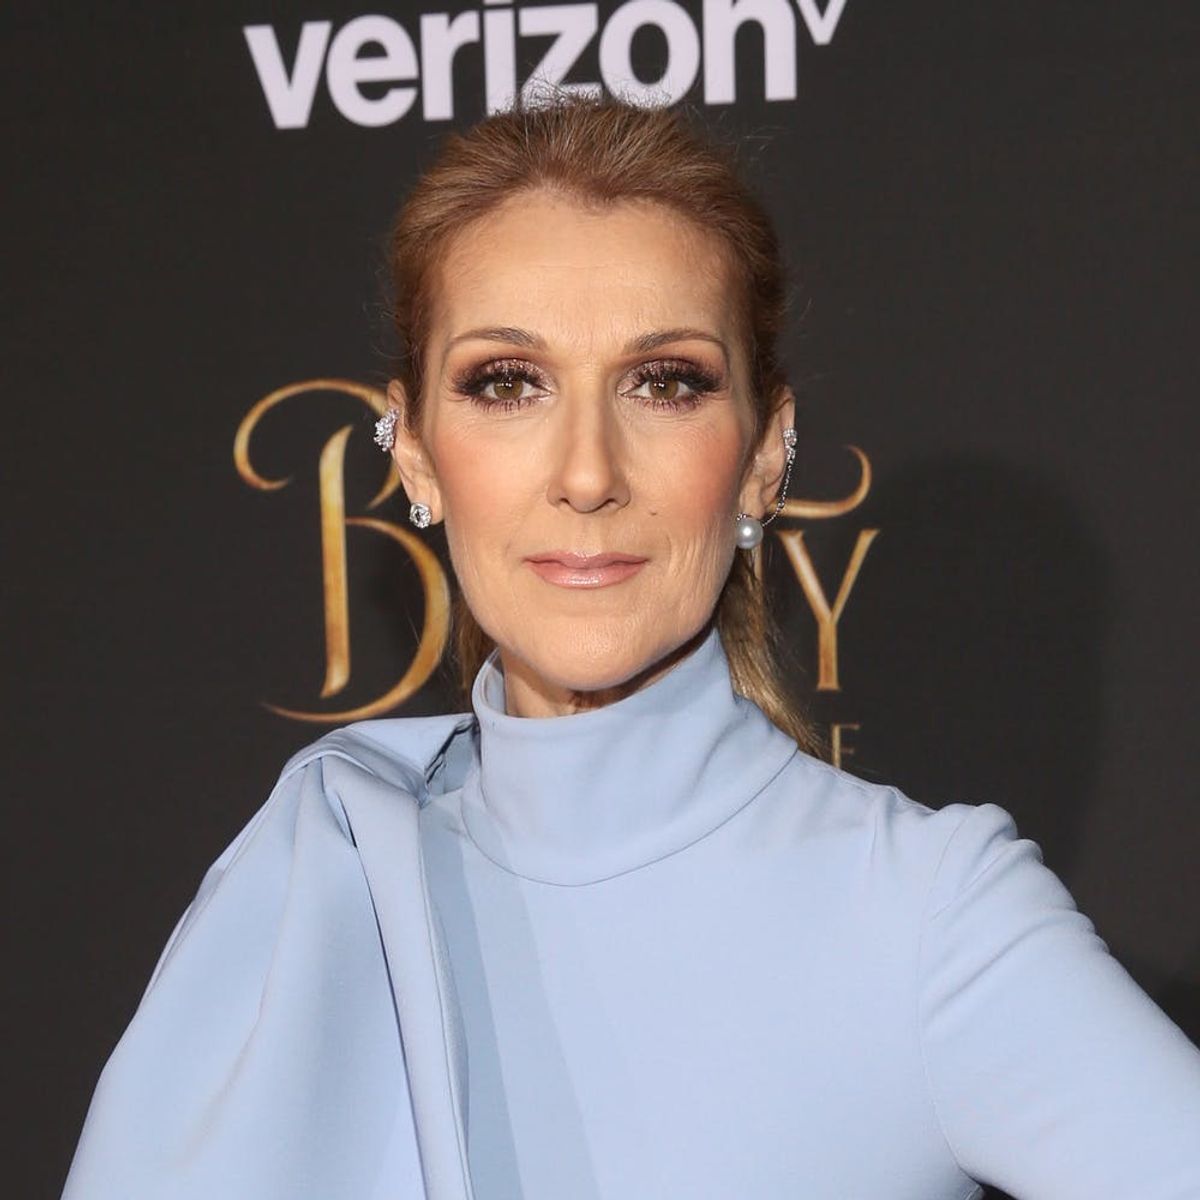 Céline Dion Just Made Her Boldest Fashion Move Yet by Going Naked for Vogue